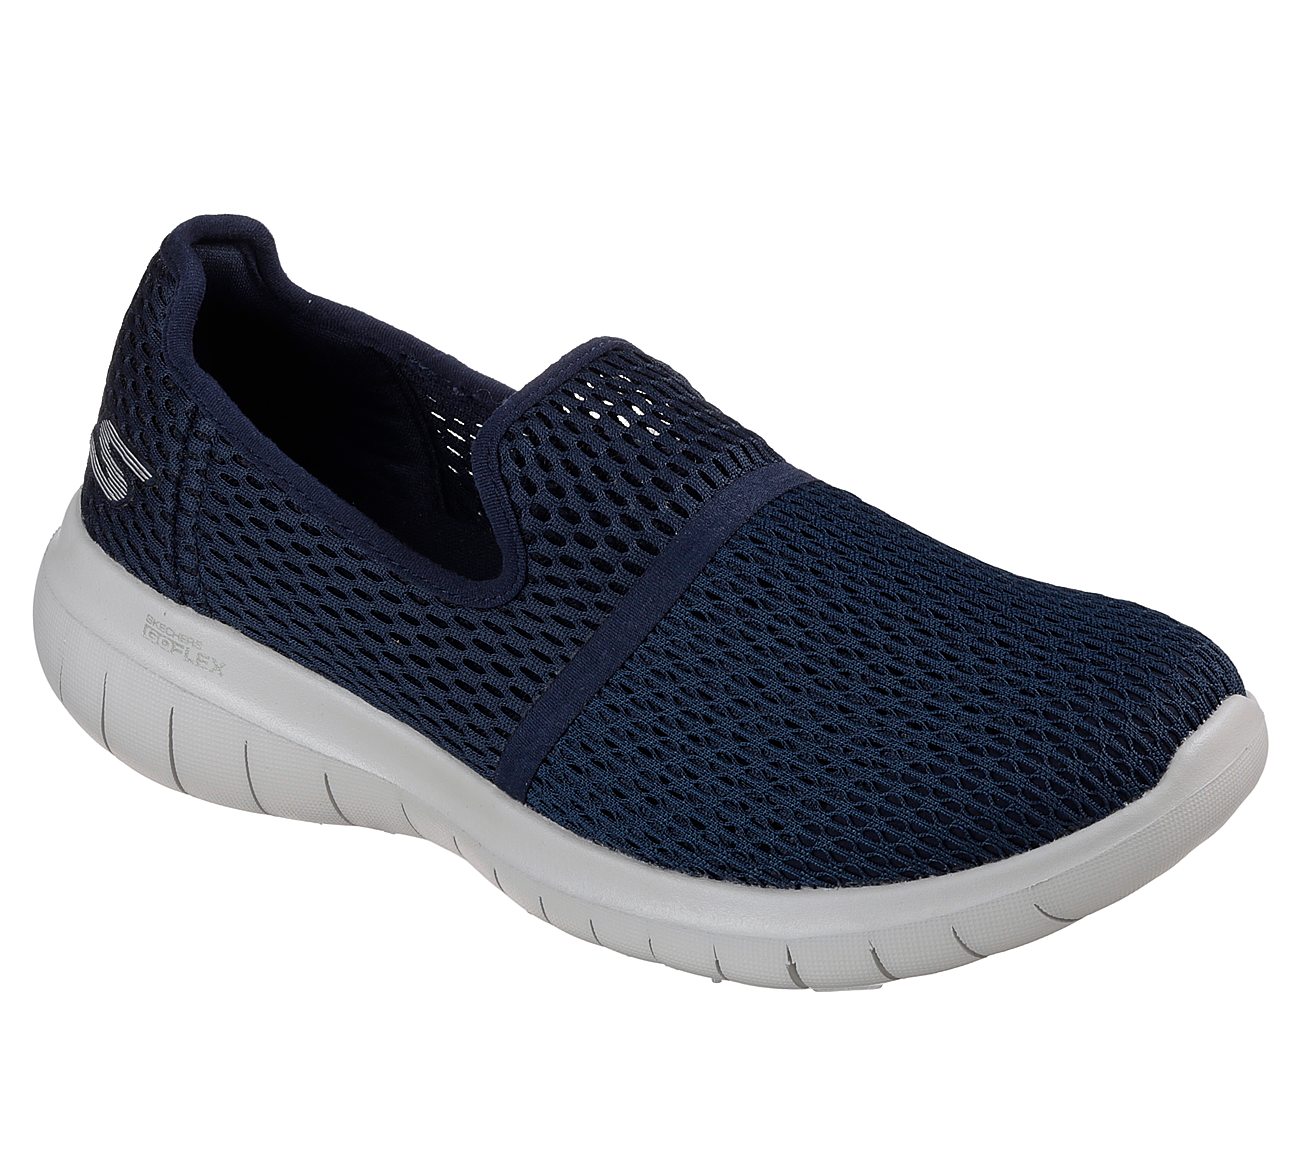 skechers goga max shoes price